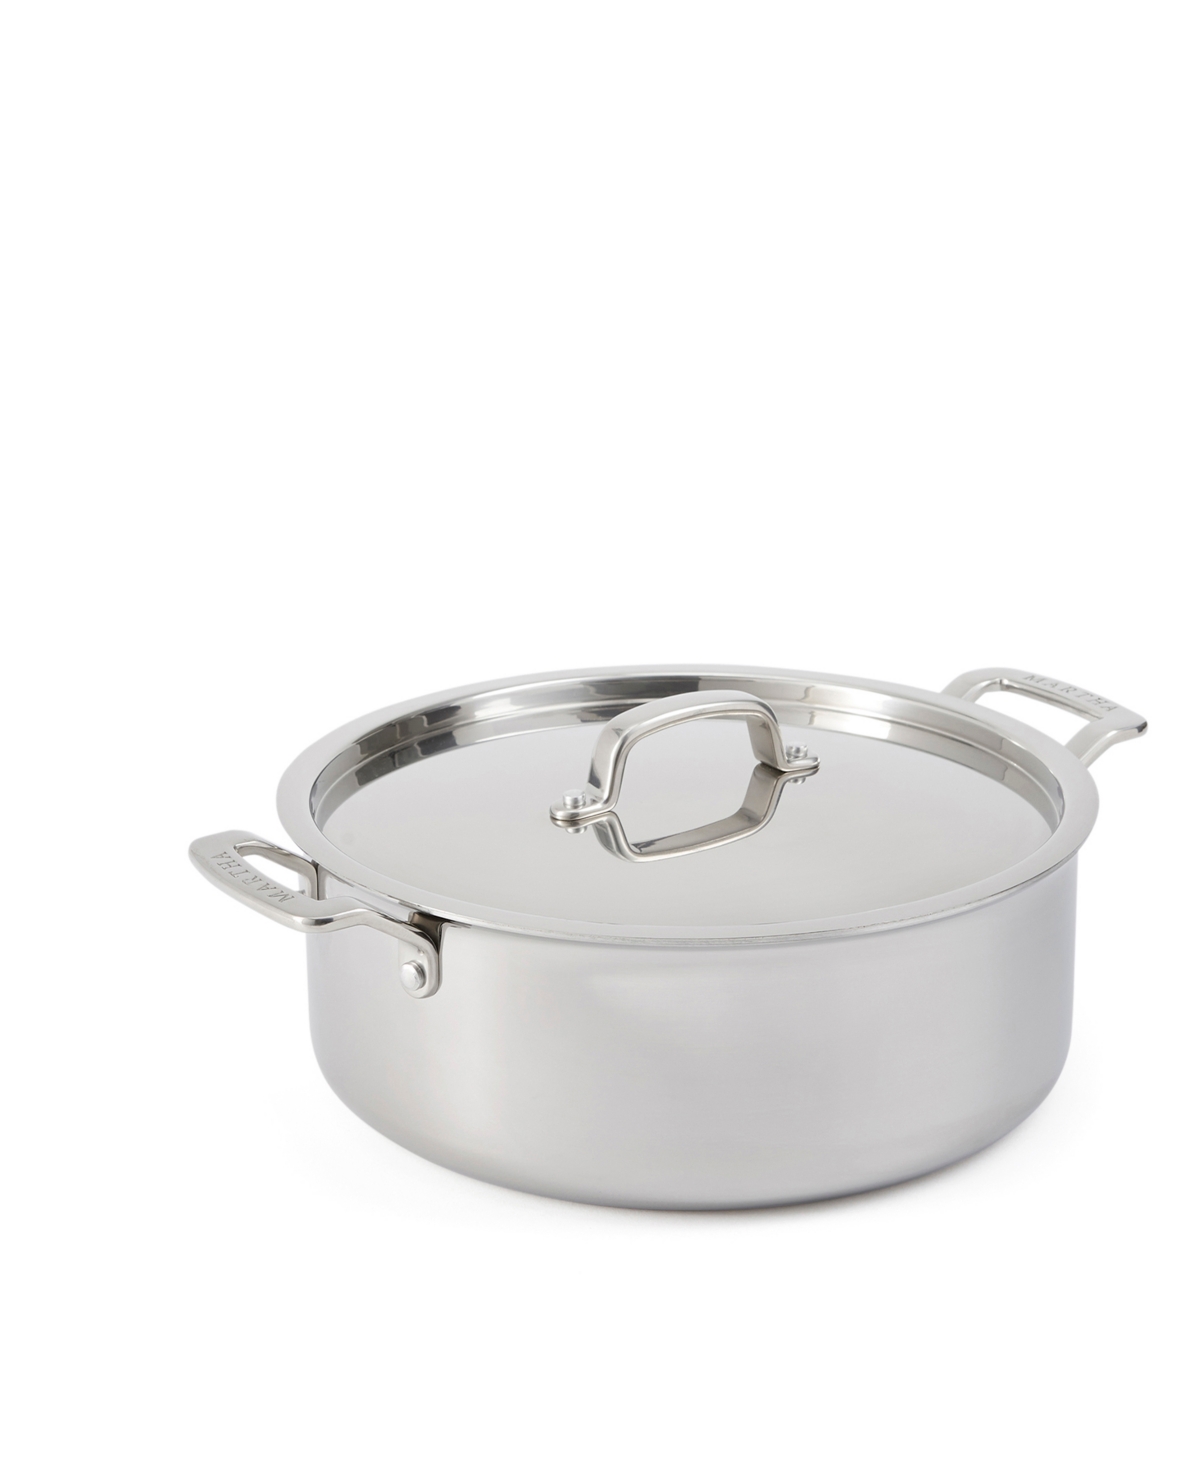 Martha Stewart Collection Martha By Martha Stewart Stainless Steel 6 Qt Shallow Stock Pot With Lid In Metallic